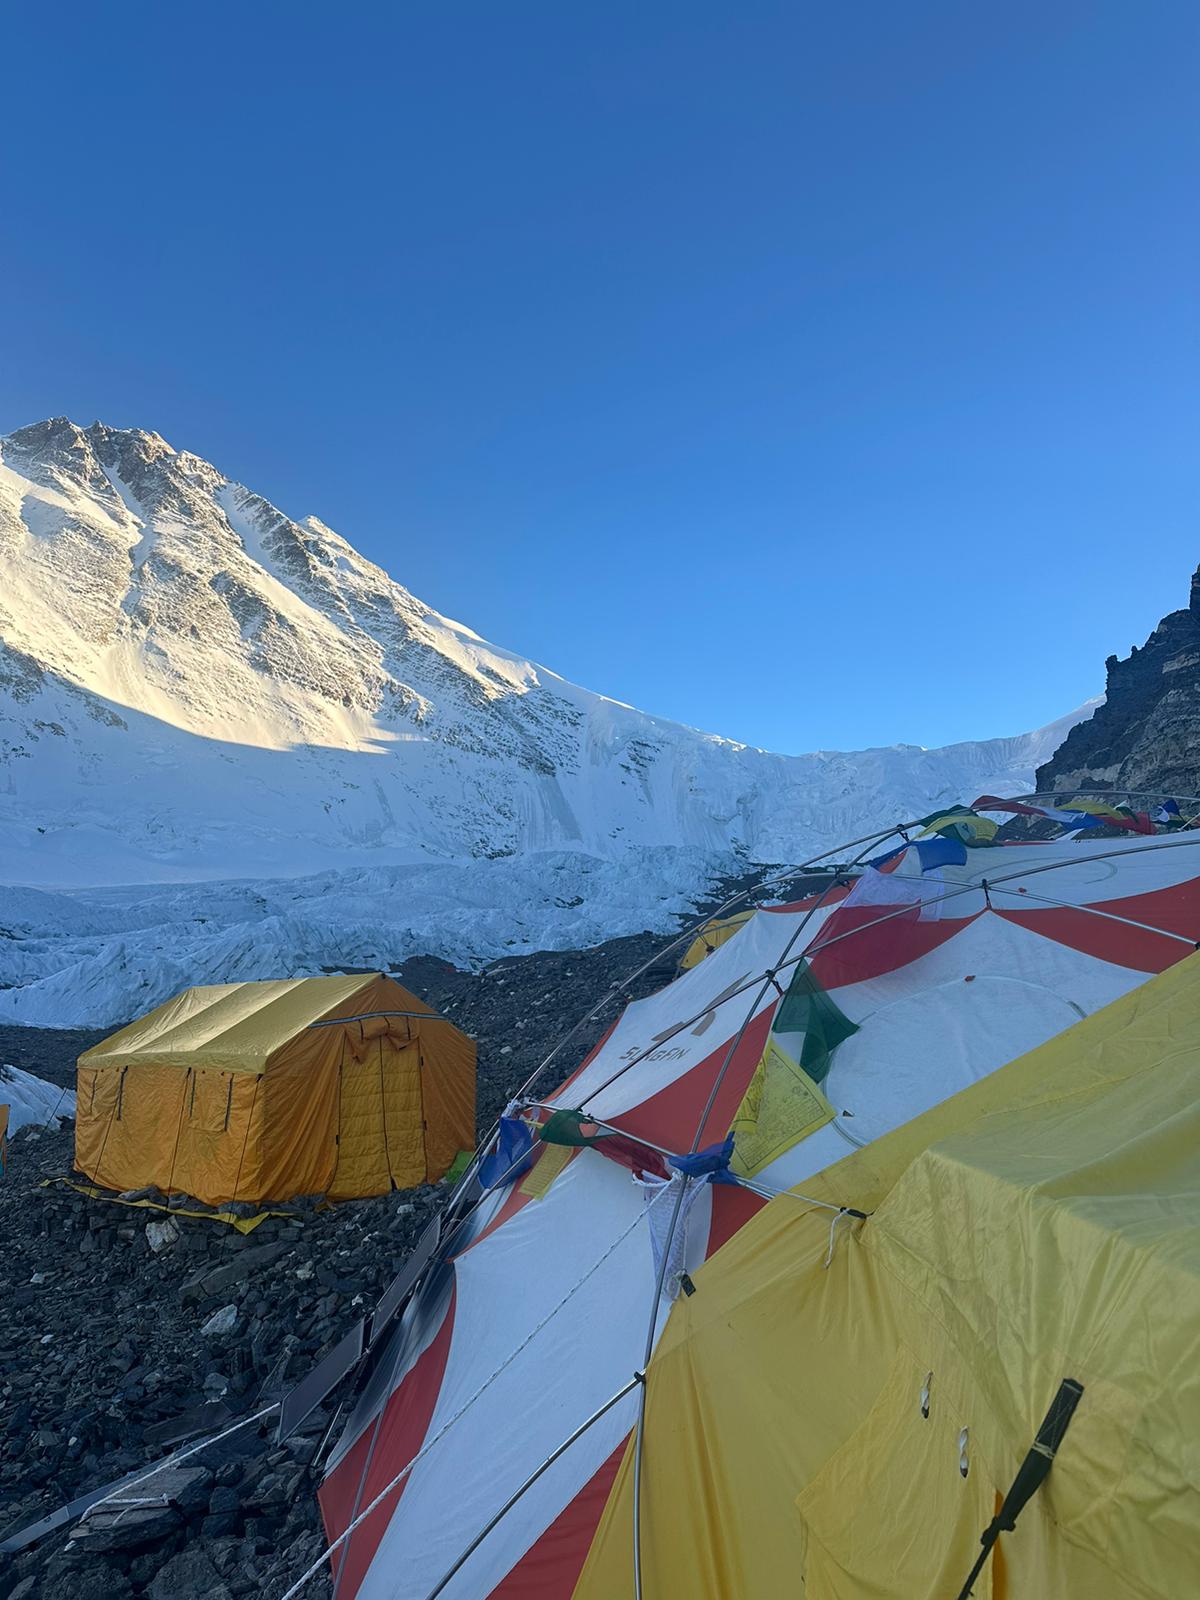 A view of North Col from Advanced Base Camp on the North Side of Everest